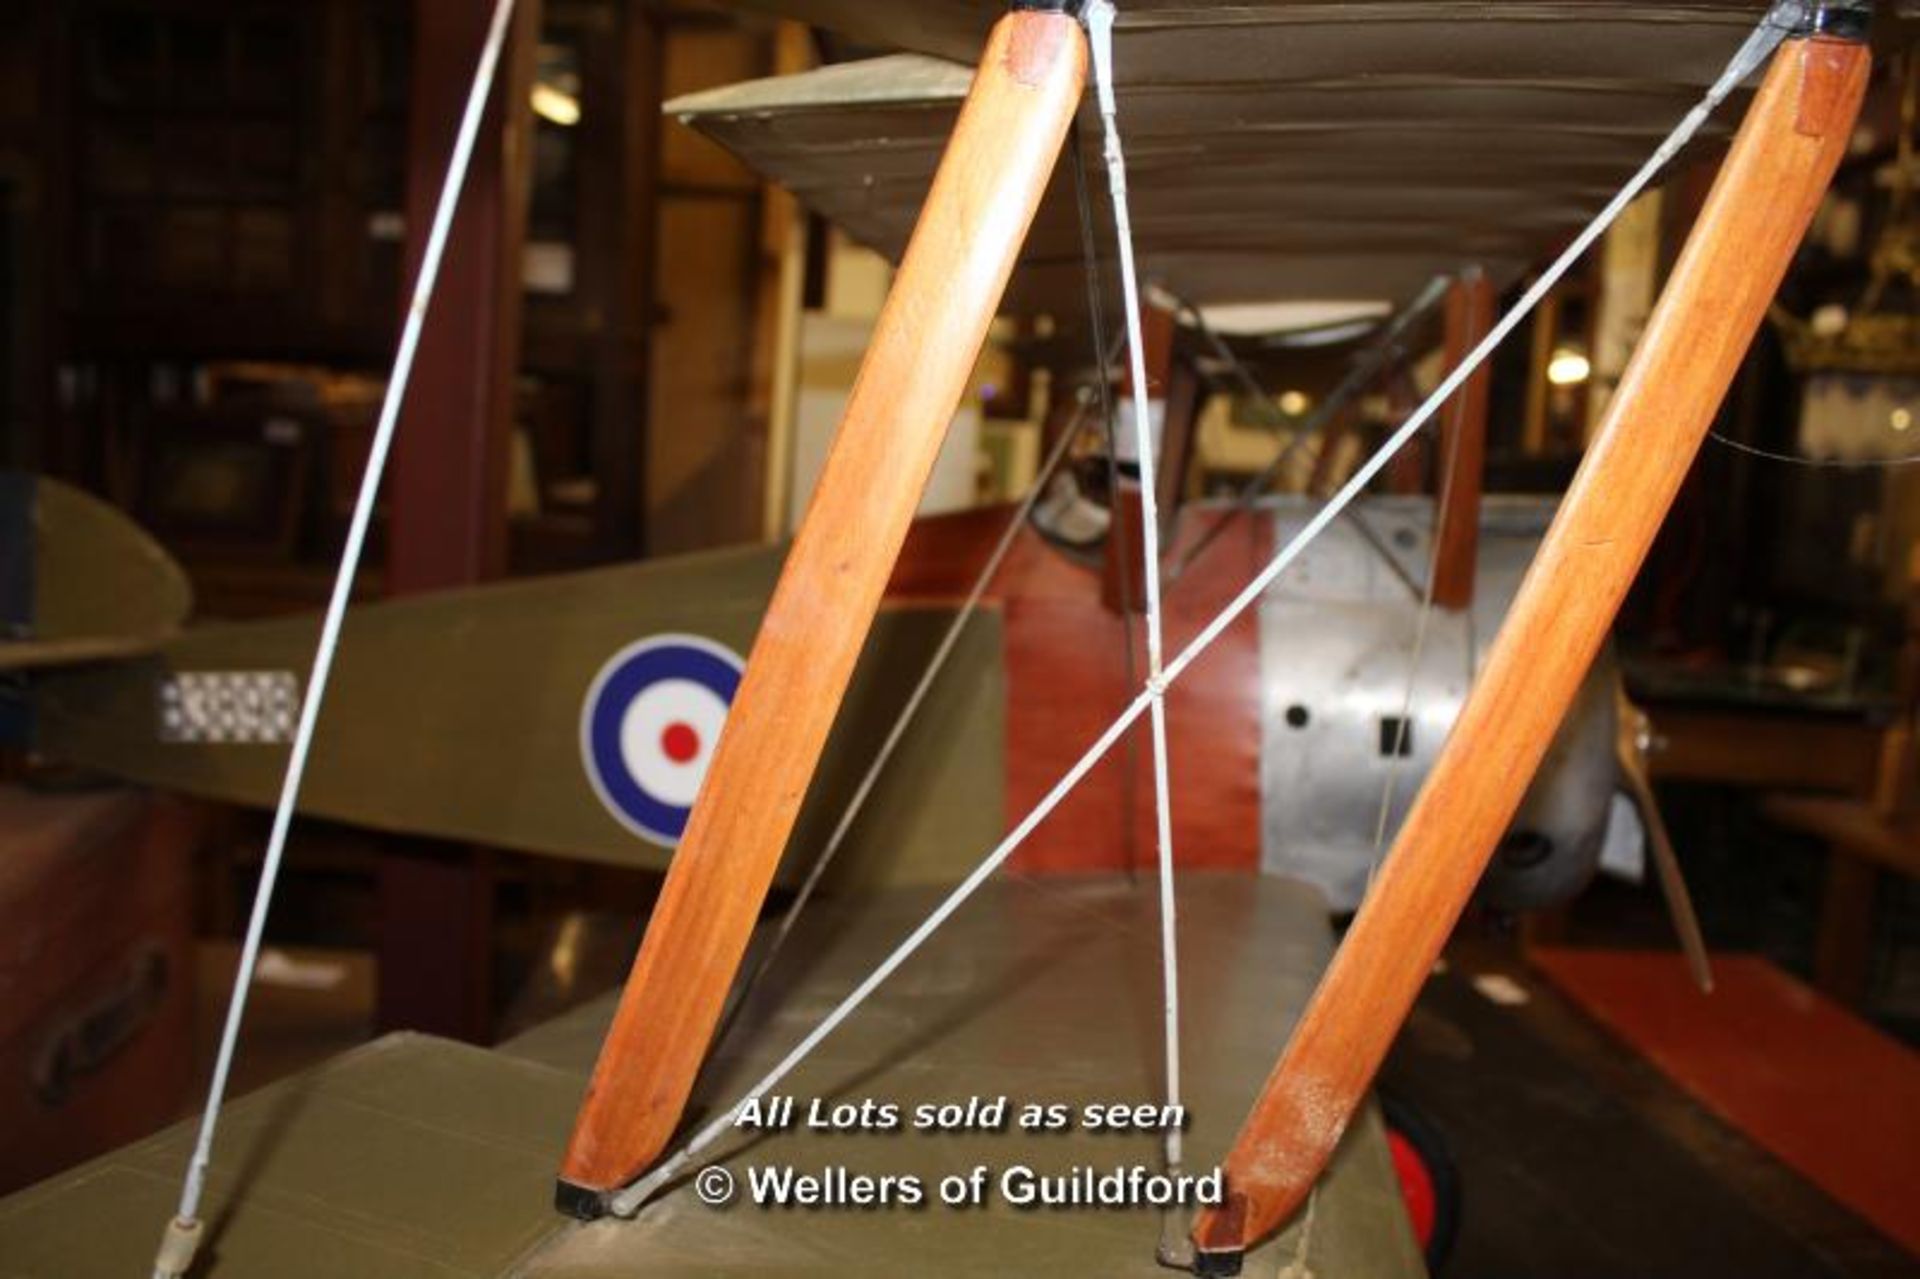 SOPWITH CAMEL, FLYING MODEL. 2135MM ( 84" ) WIDE X 1400MM ( 55" ) DEEP X 660MM ( 26" ) HIGH. [0] - Image 12 of 13